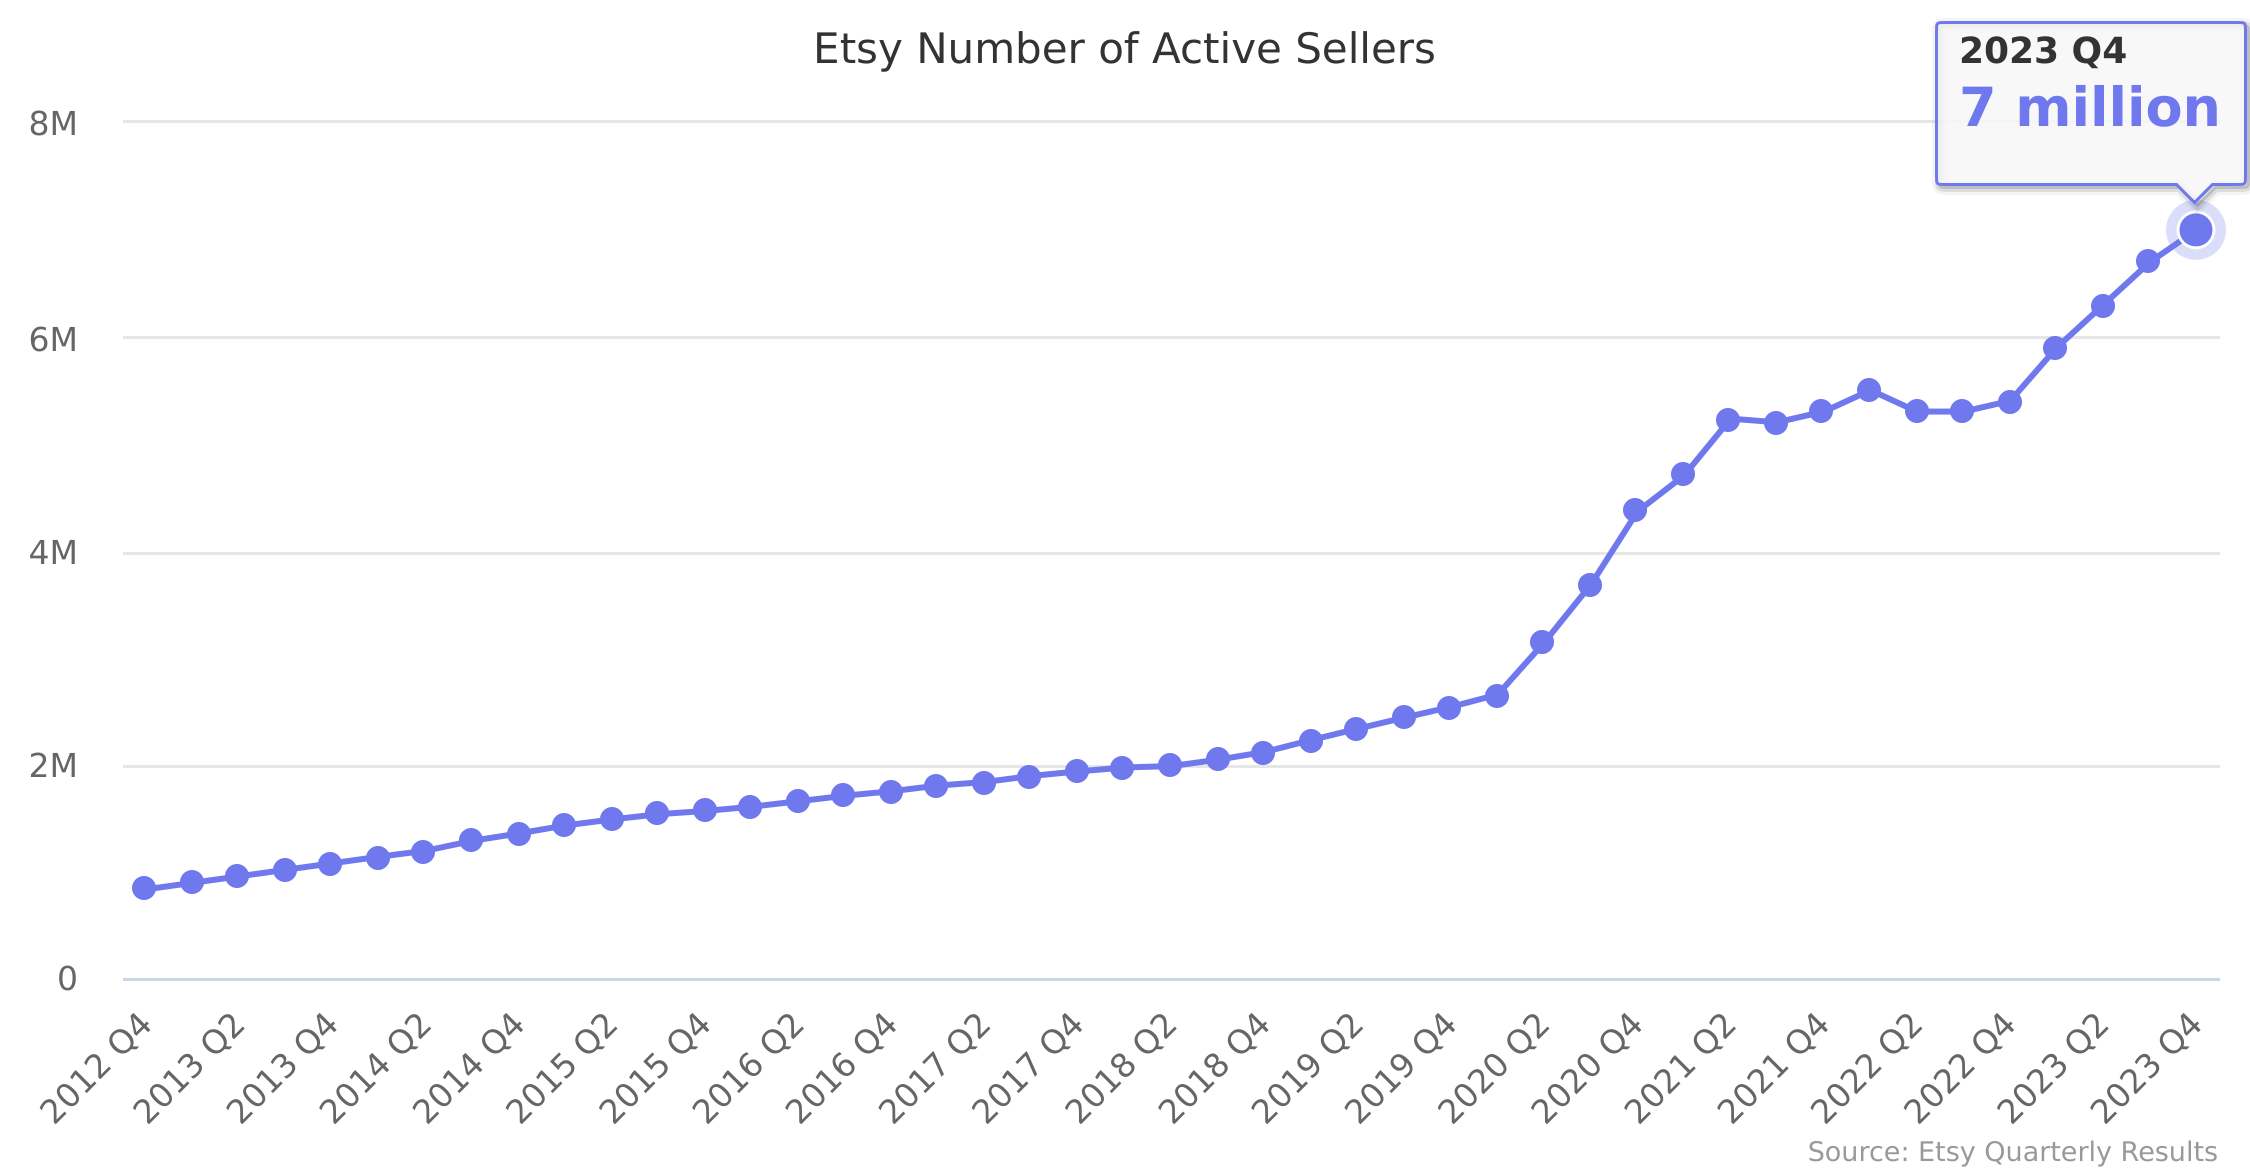 Etsy Number of Active Sellers